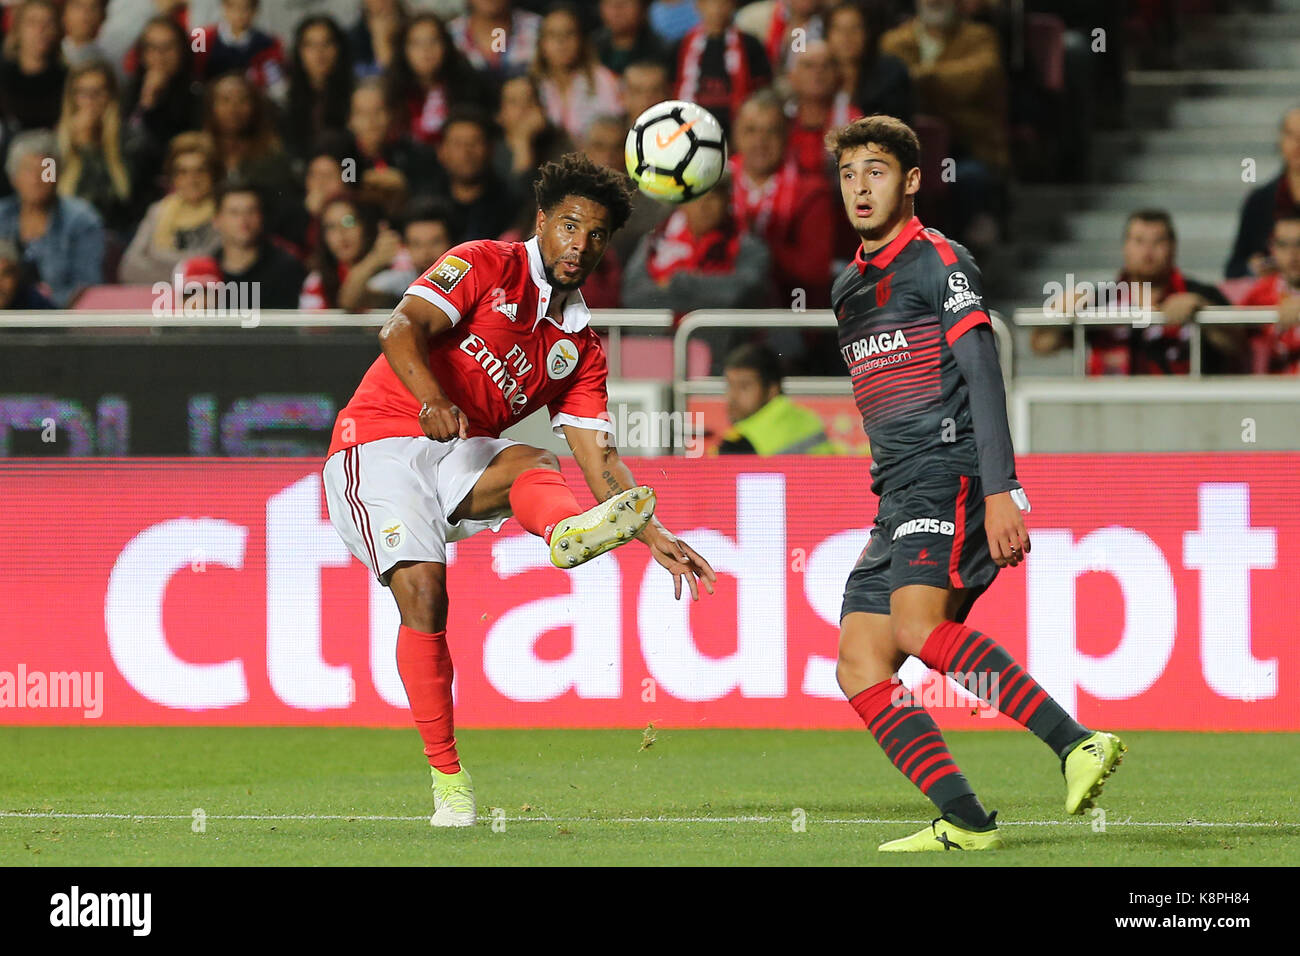 Lisbon, Portugal. 20th Sep, 2017. Benfica's defender Eliseu from Portugal (L) and Braga's forward Bruno Xadas from Portugal (R) during the Portuguese Cup 2017/18 match between SL Benfica v SC Braga, at Luz Stadium in Lisbon on September 20, 2017. Credit: Bruno Barros/Alamy Live News Stock Photo